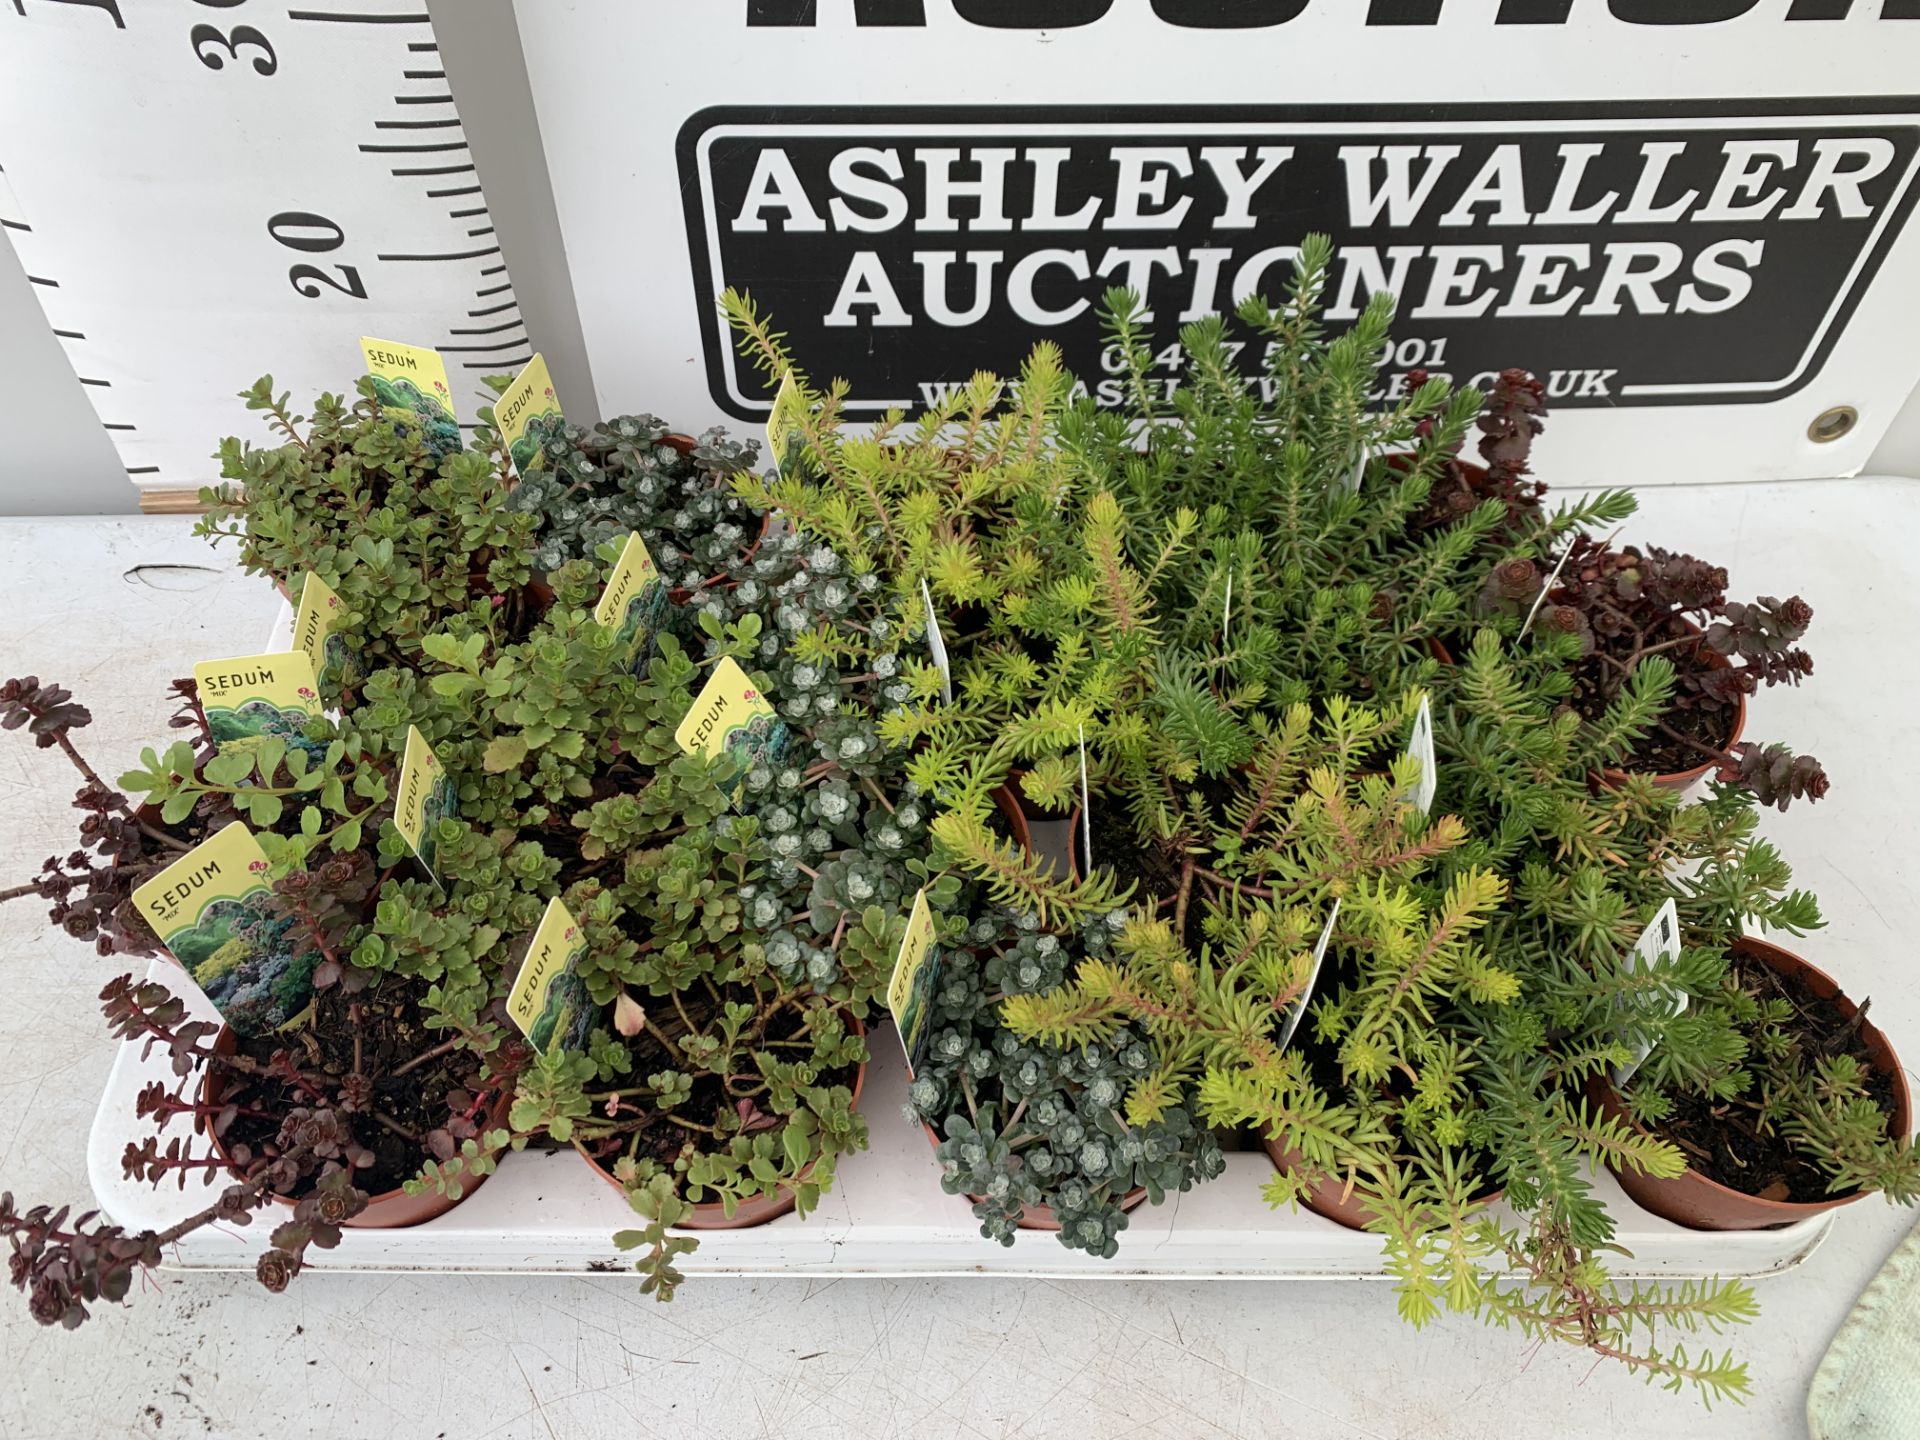 TWENTY MIXED SEDUMS ON A TRAY PLUS VAT TO BE SOLD FOR THE TWENTY - Image 5 of 10